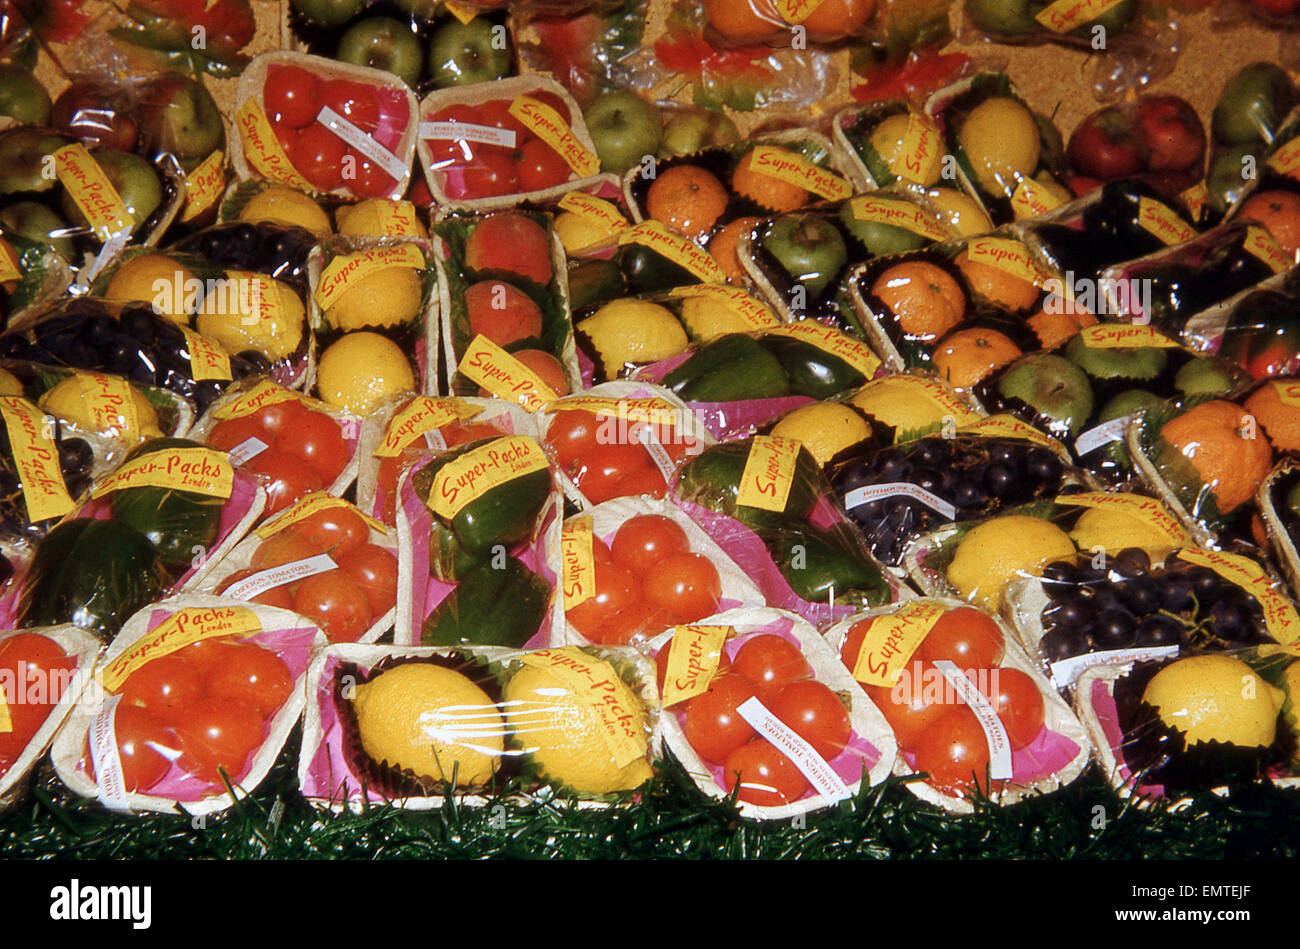 1959, historical, Empire imported packs of mixed fruit on display at a Royal show, Cambridge, Minear & Munday fruit specialists and holders of two Royal Warrants. Stock Photo